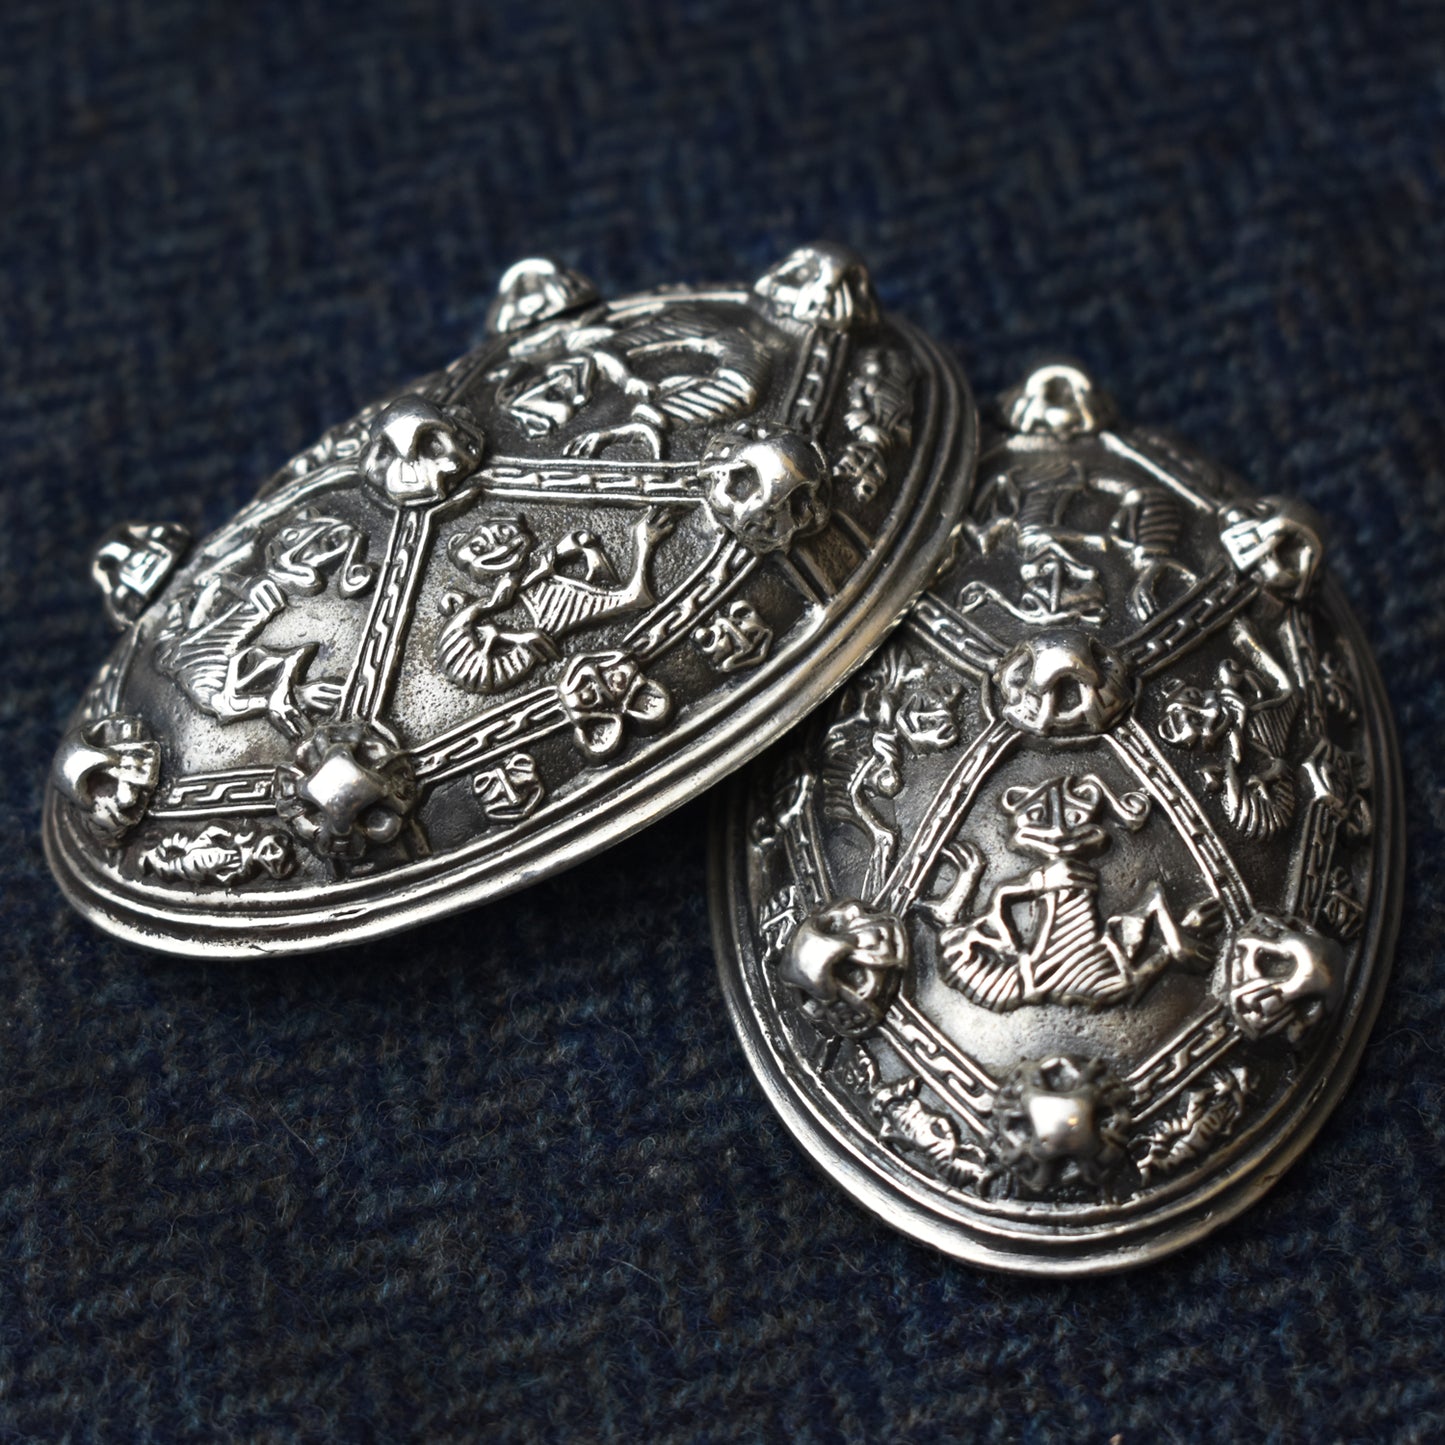 Pair of Tortoise Brooches - Silver